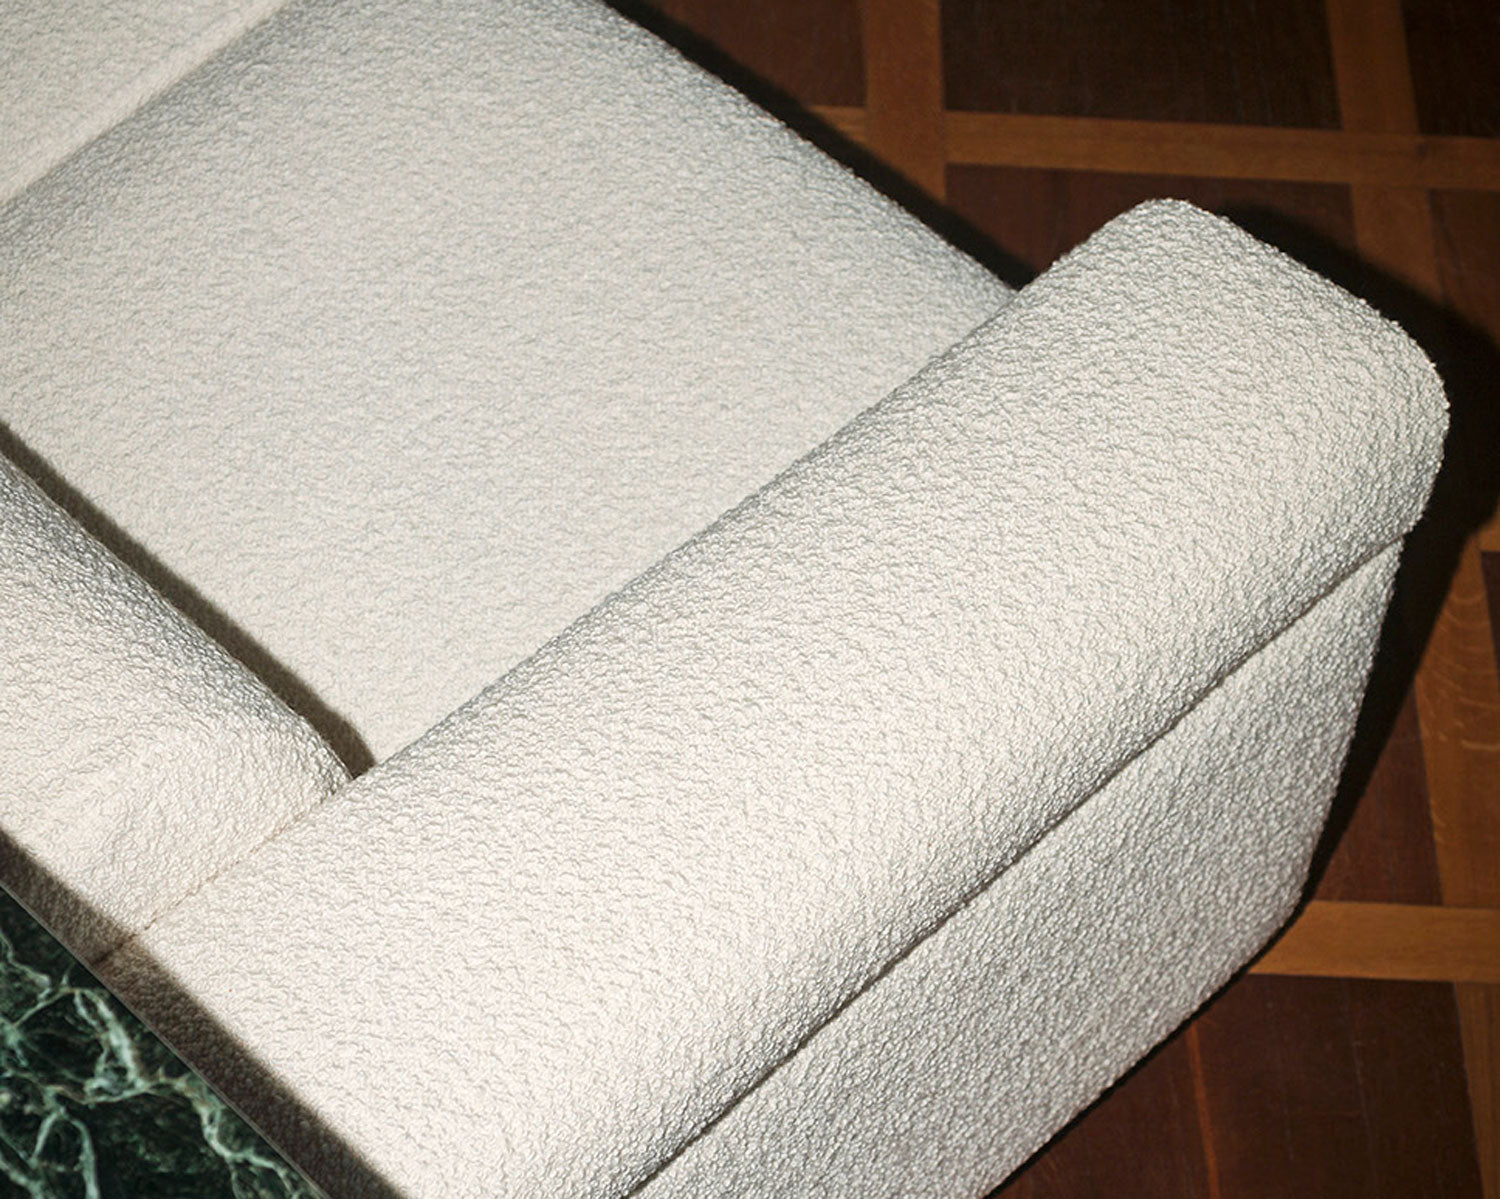 Textured Upholstery | DSHOP